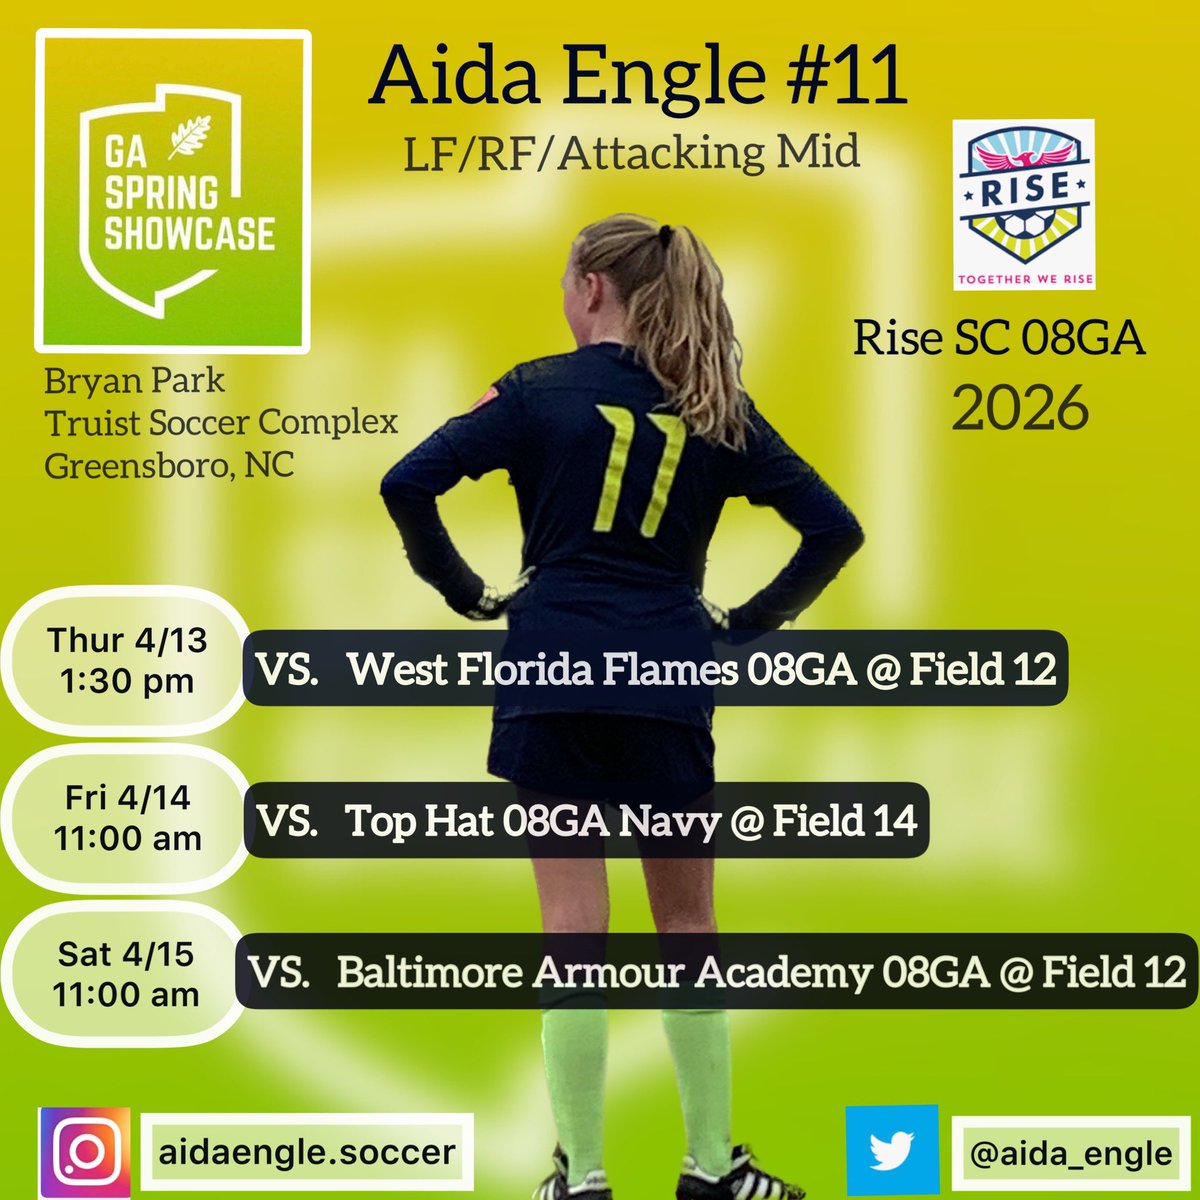 Ready to compete with @Rise08G this week in NC in the @GAcademyLeague showcase! Who else is ready? @scoutingzone @ImCollegeSoccer @ImYouthSoccer @RiseSoccerClub @50_50Pod @SoccerMomInt 

#GASpring